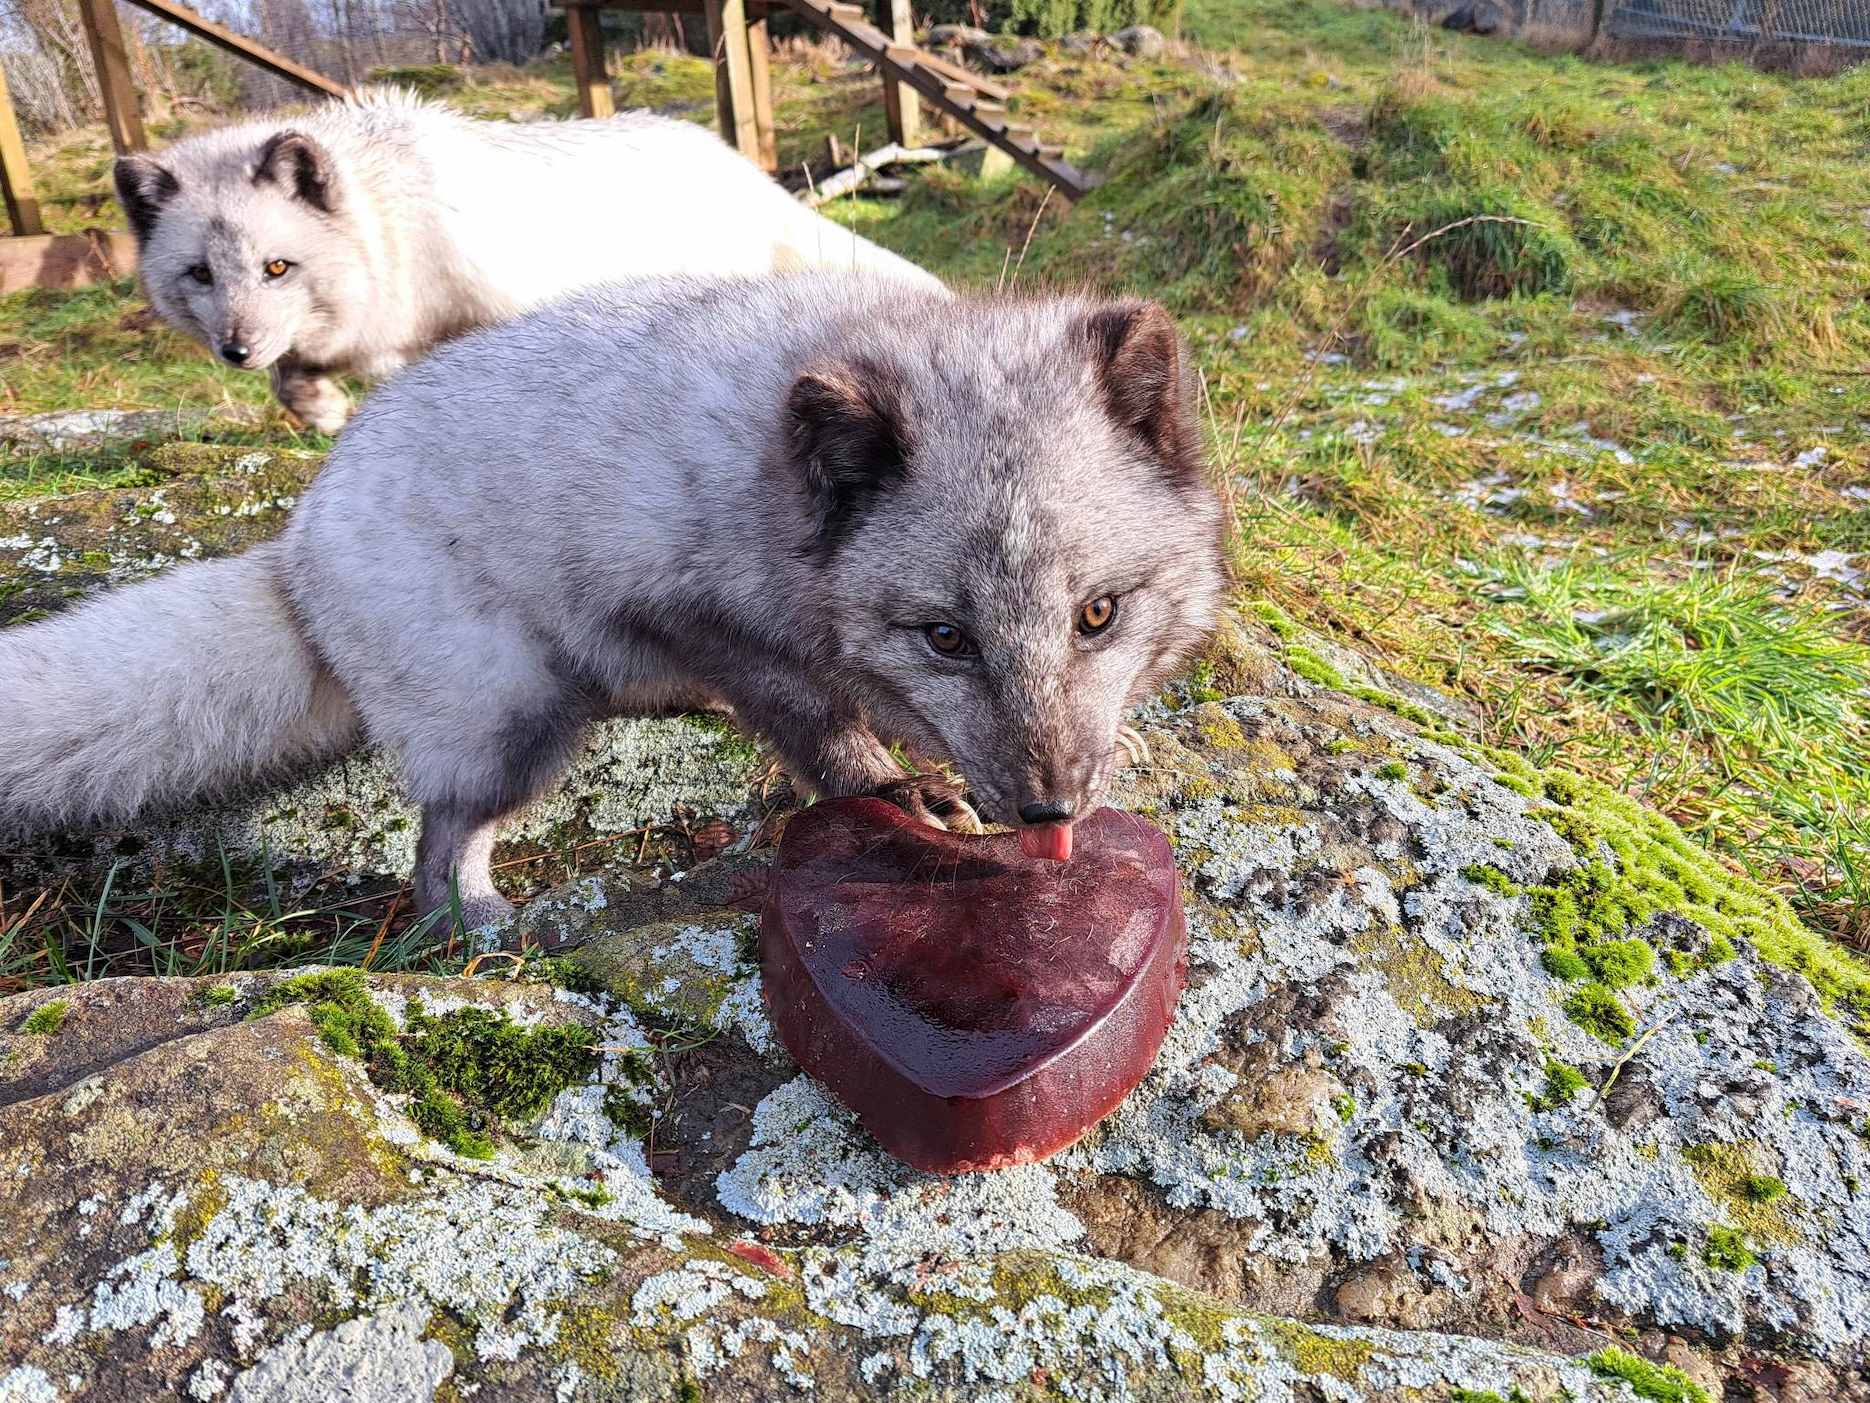 Arctic foxes Jack and Sarah enjoying frozen blood heart for valentines enrichment

Image: VICKIE LARKIN 2023